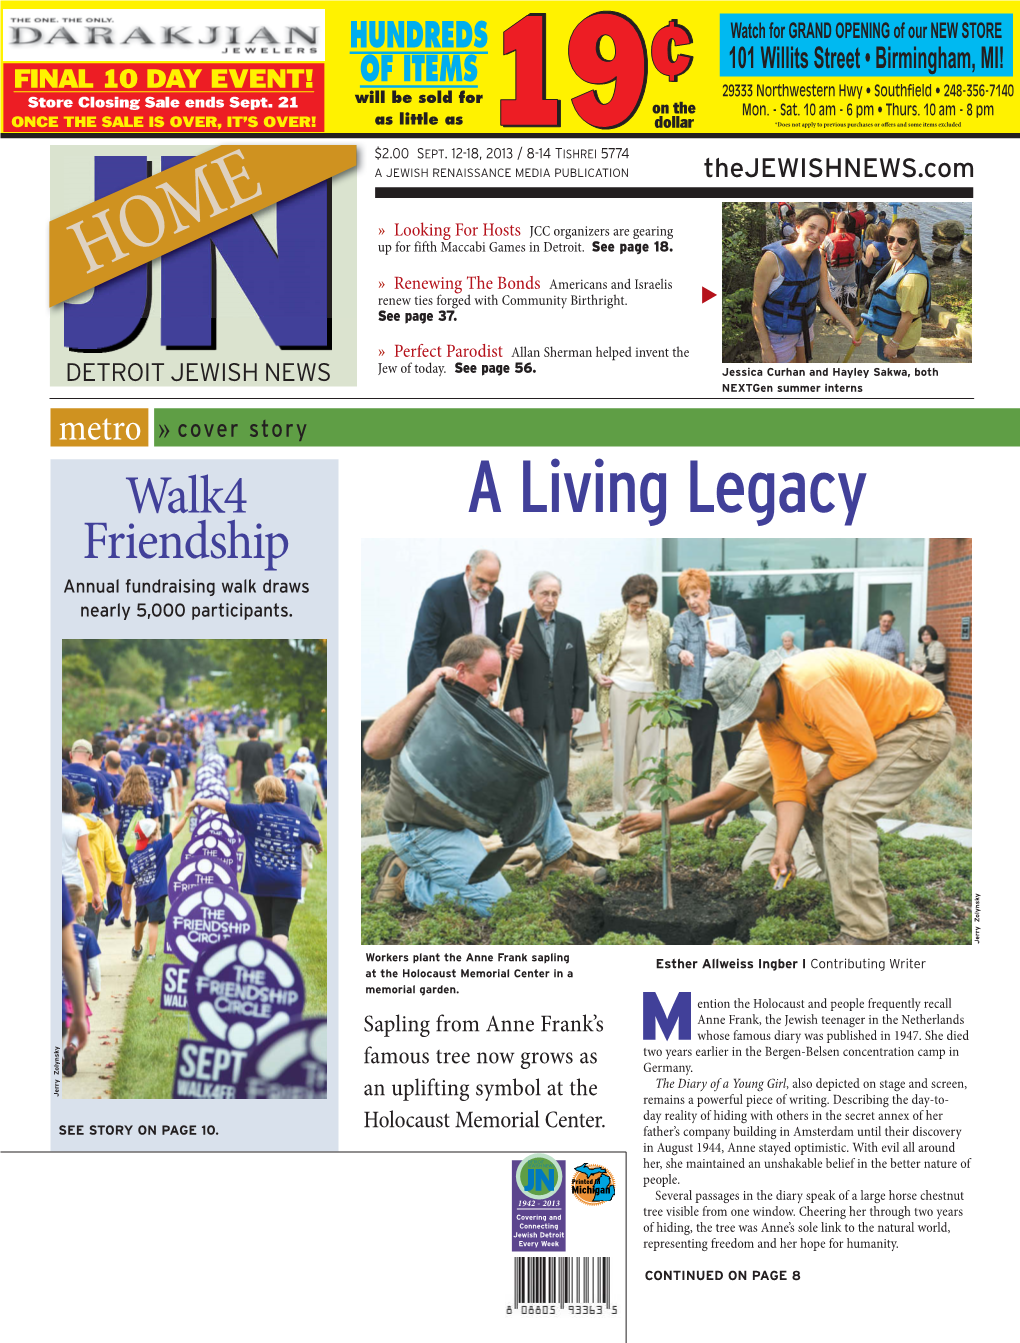 A Living Legacy Friendship Annual Fundraising Walk Draws Nearly 5,000 Participants